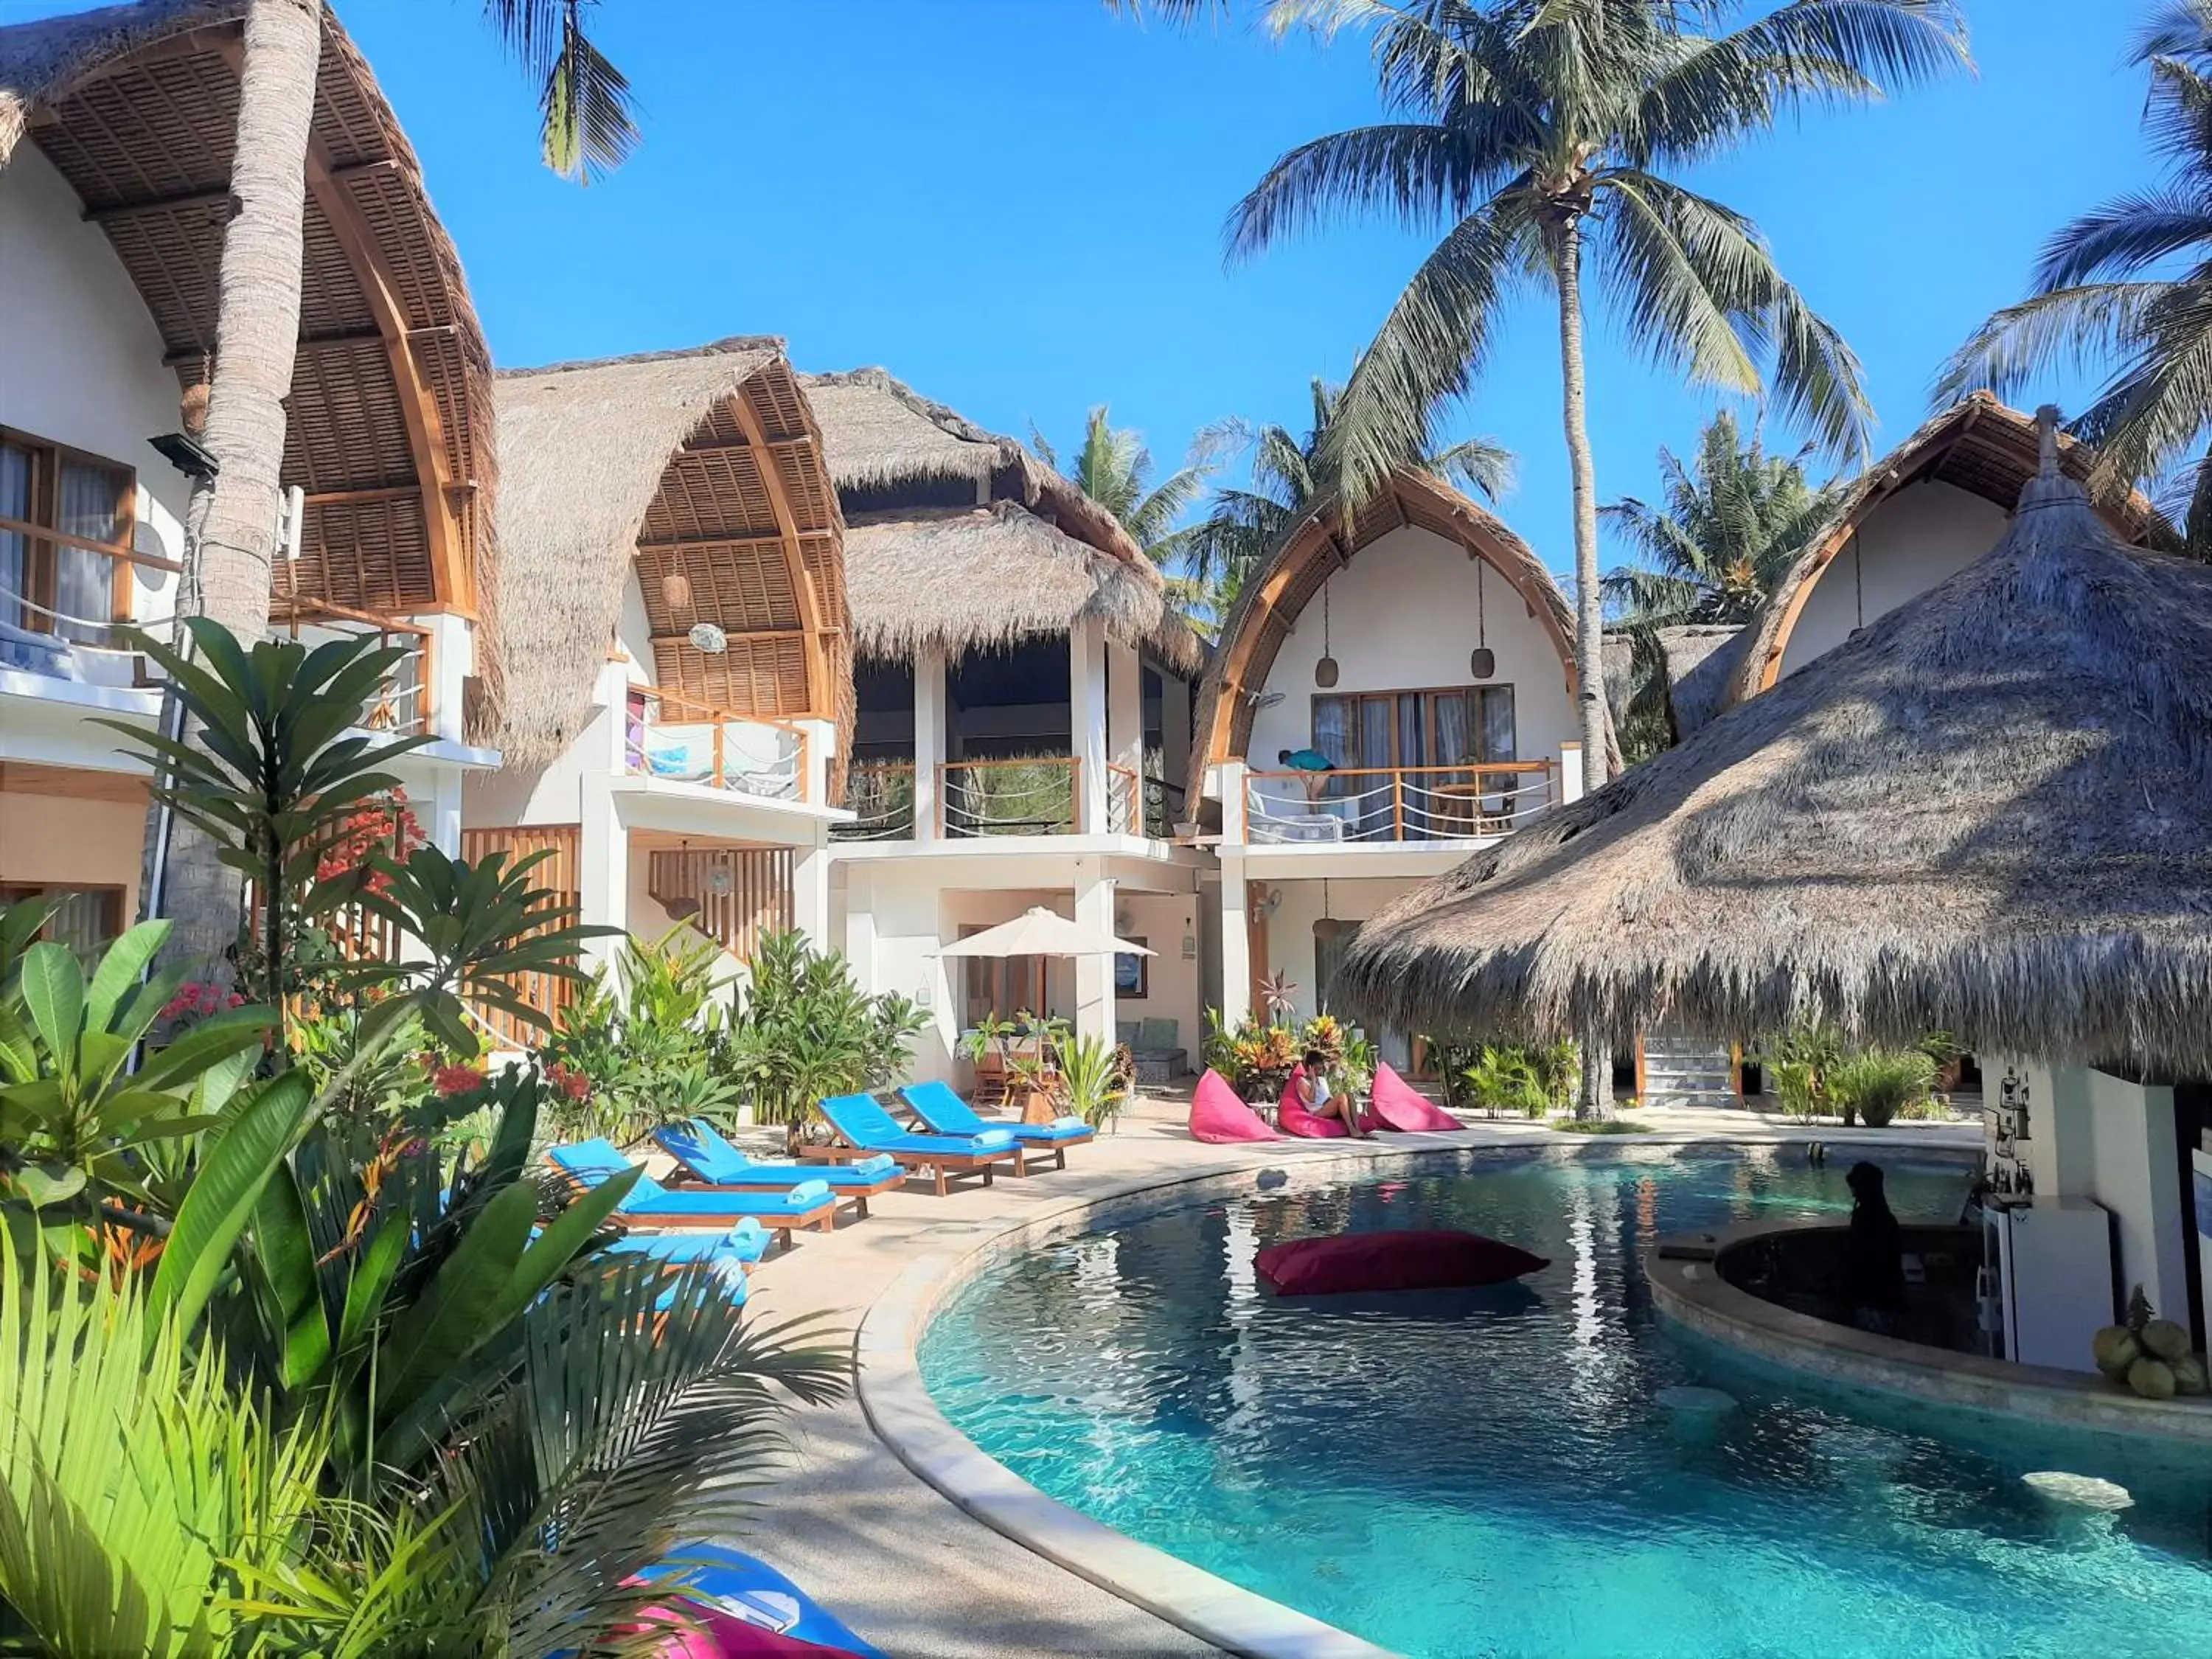 Property building, Swimming Pool in Coco Cabana